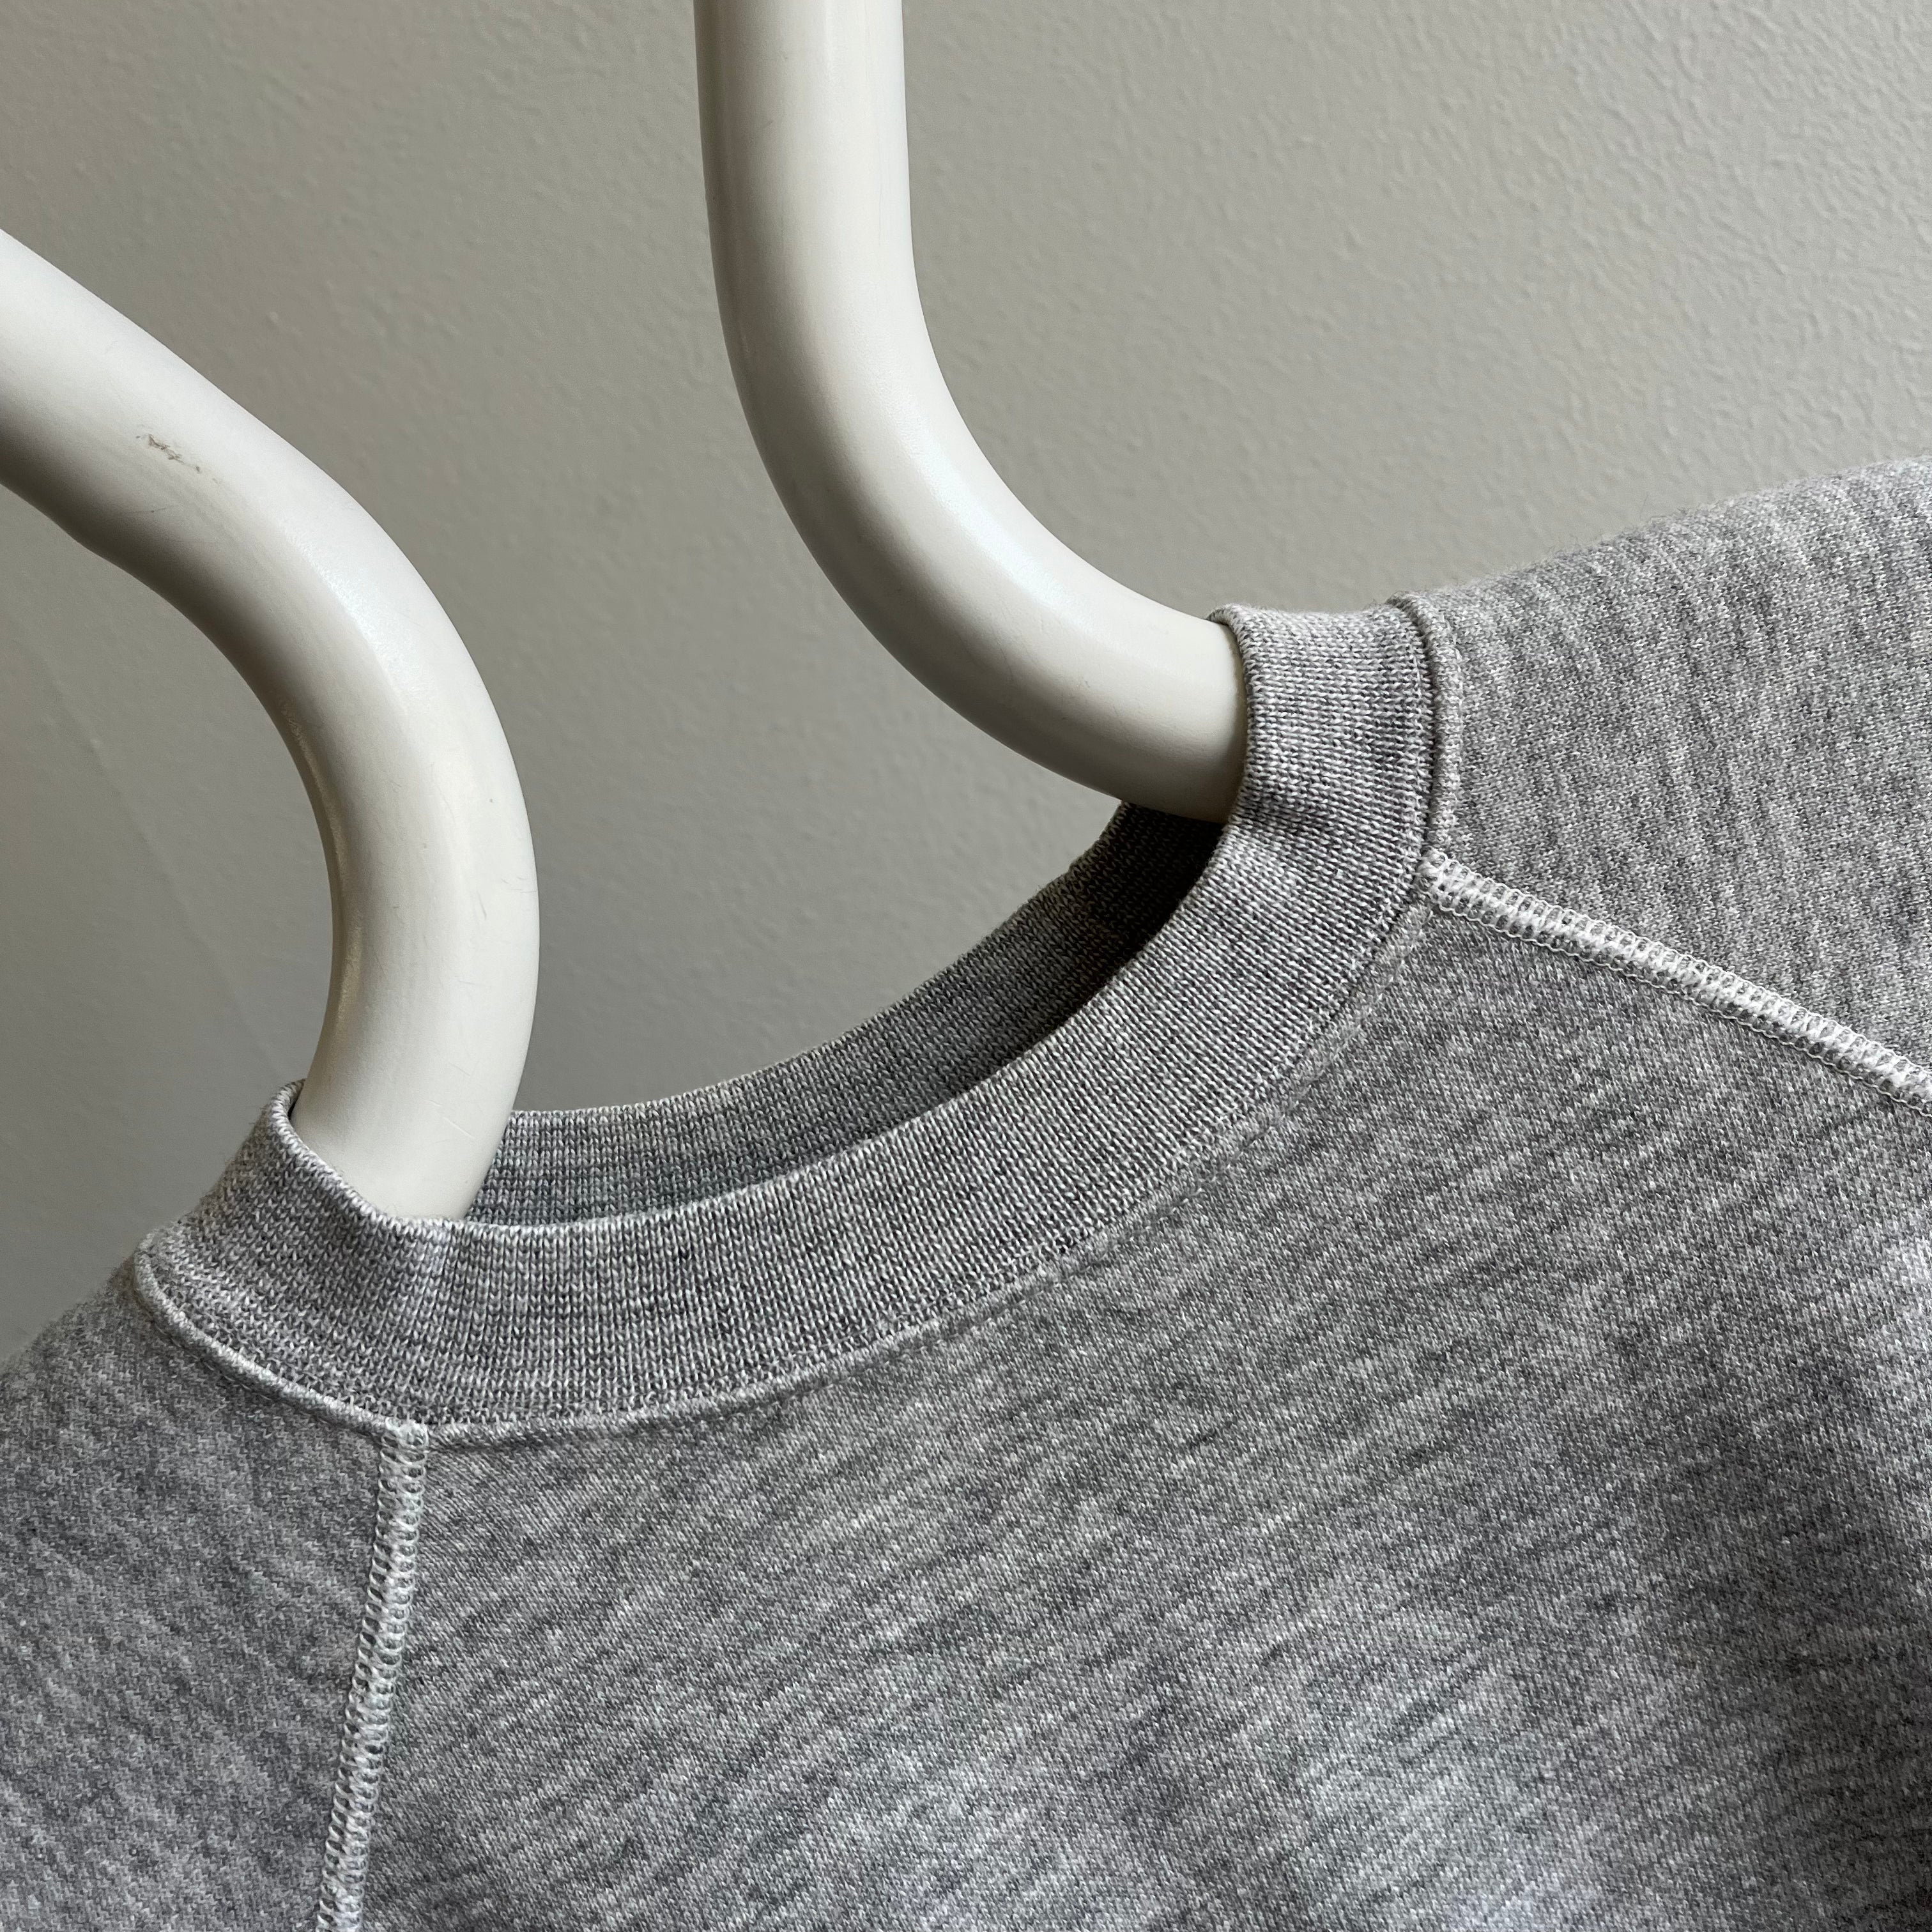 1980s Blank Gray Hanes Raglan with Contrast Stitching and Faint Rust Staining